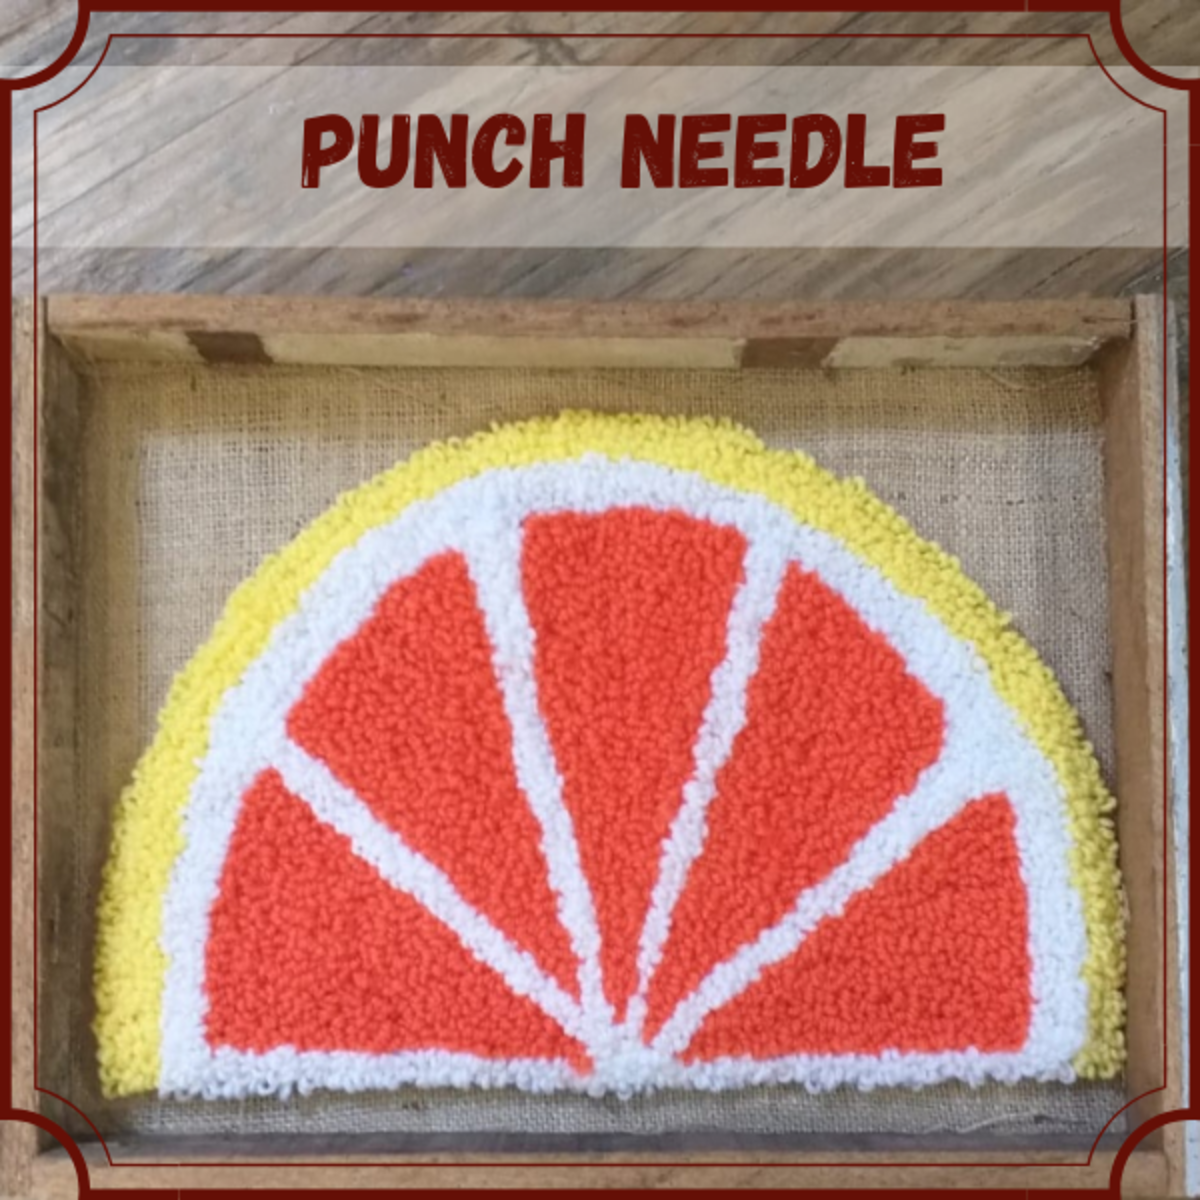 Punch Needle: Step-by-Step Craft Tutorial for Beginners